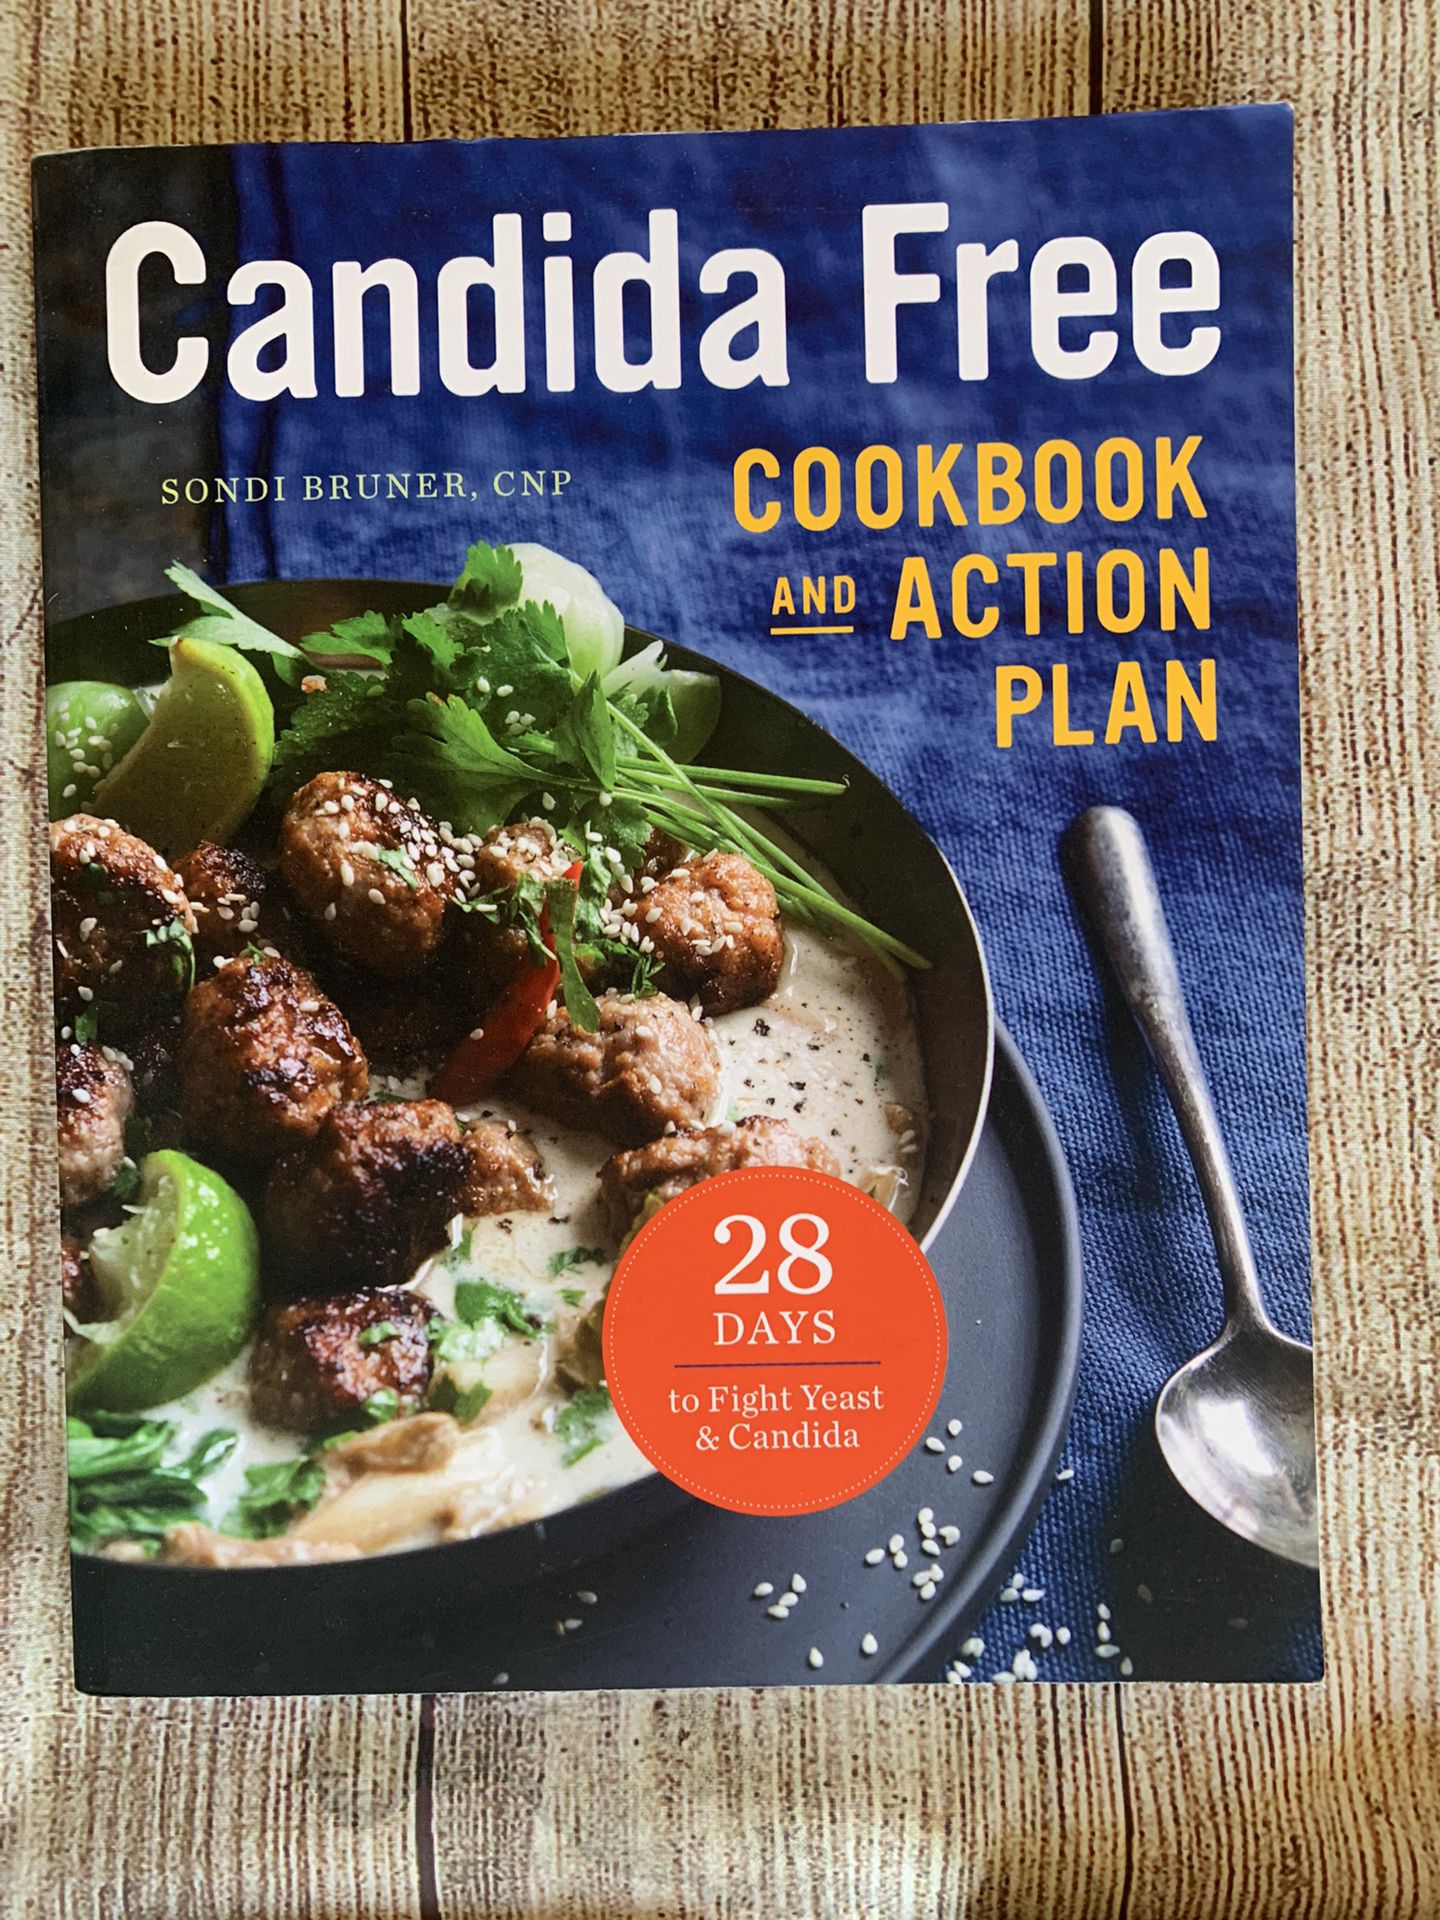 Book: Candida free Cookbook and action plan